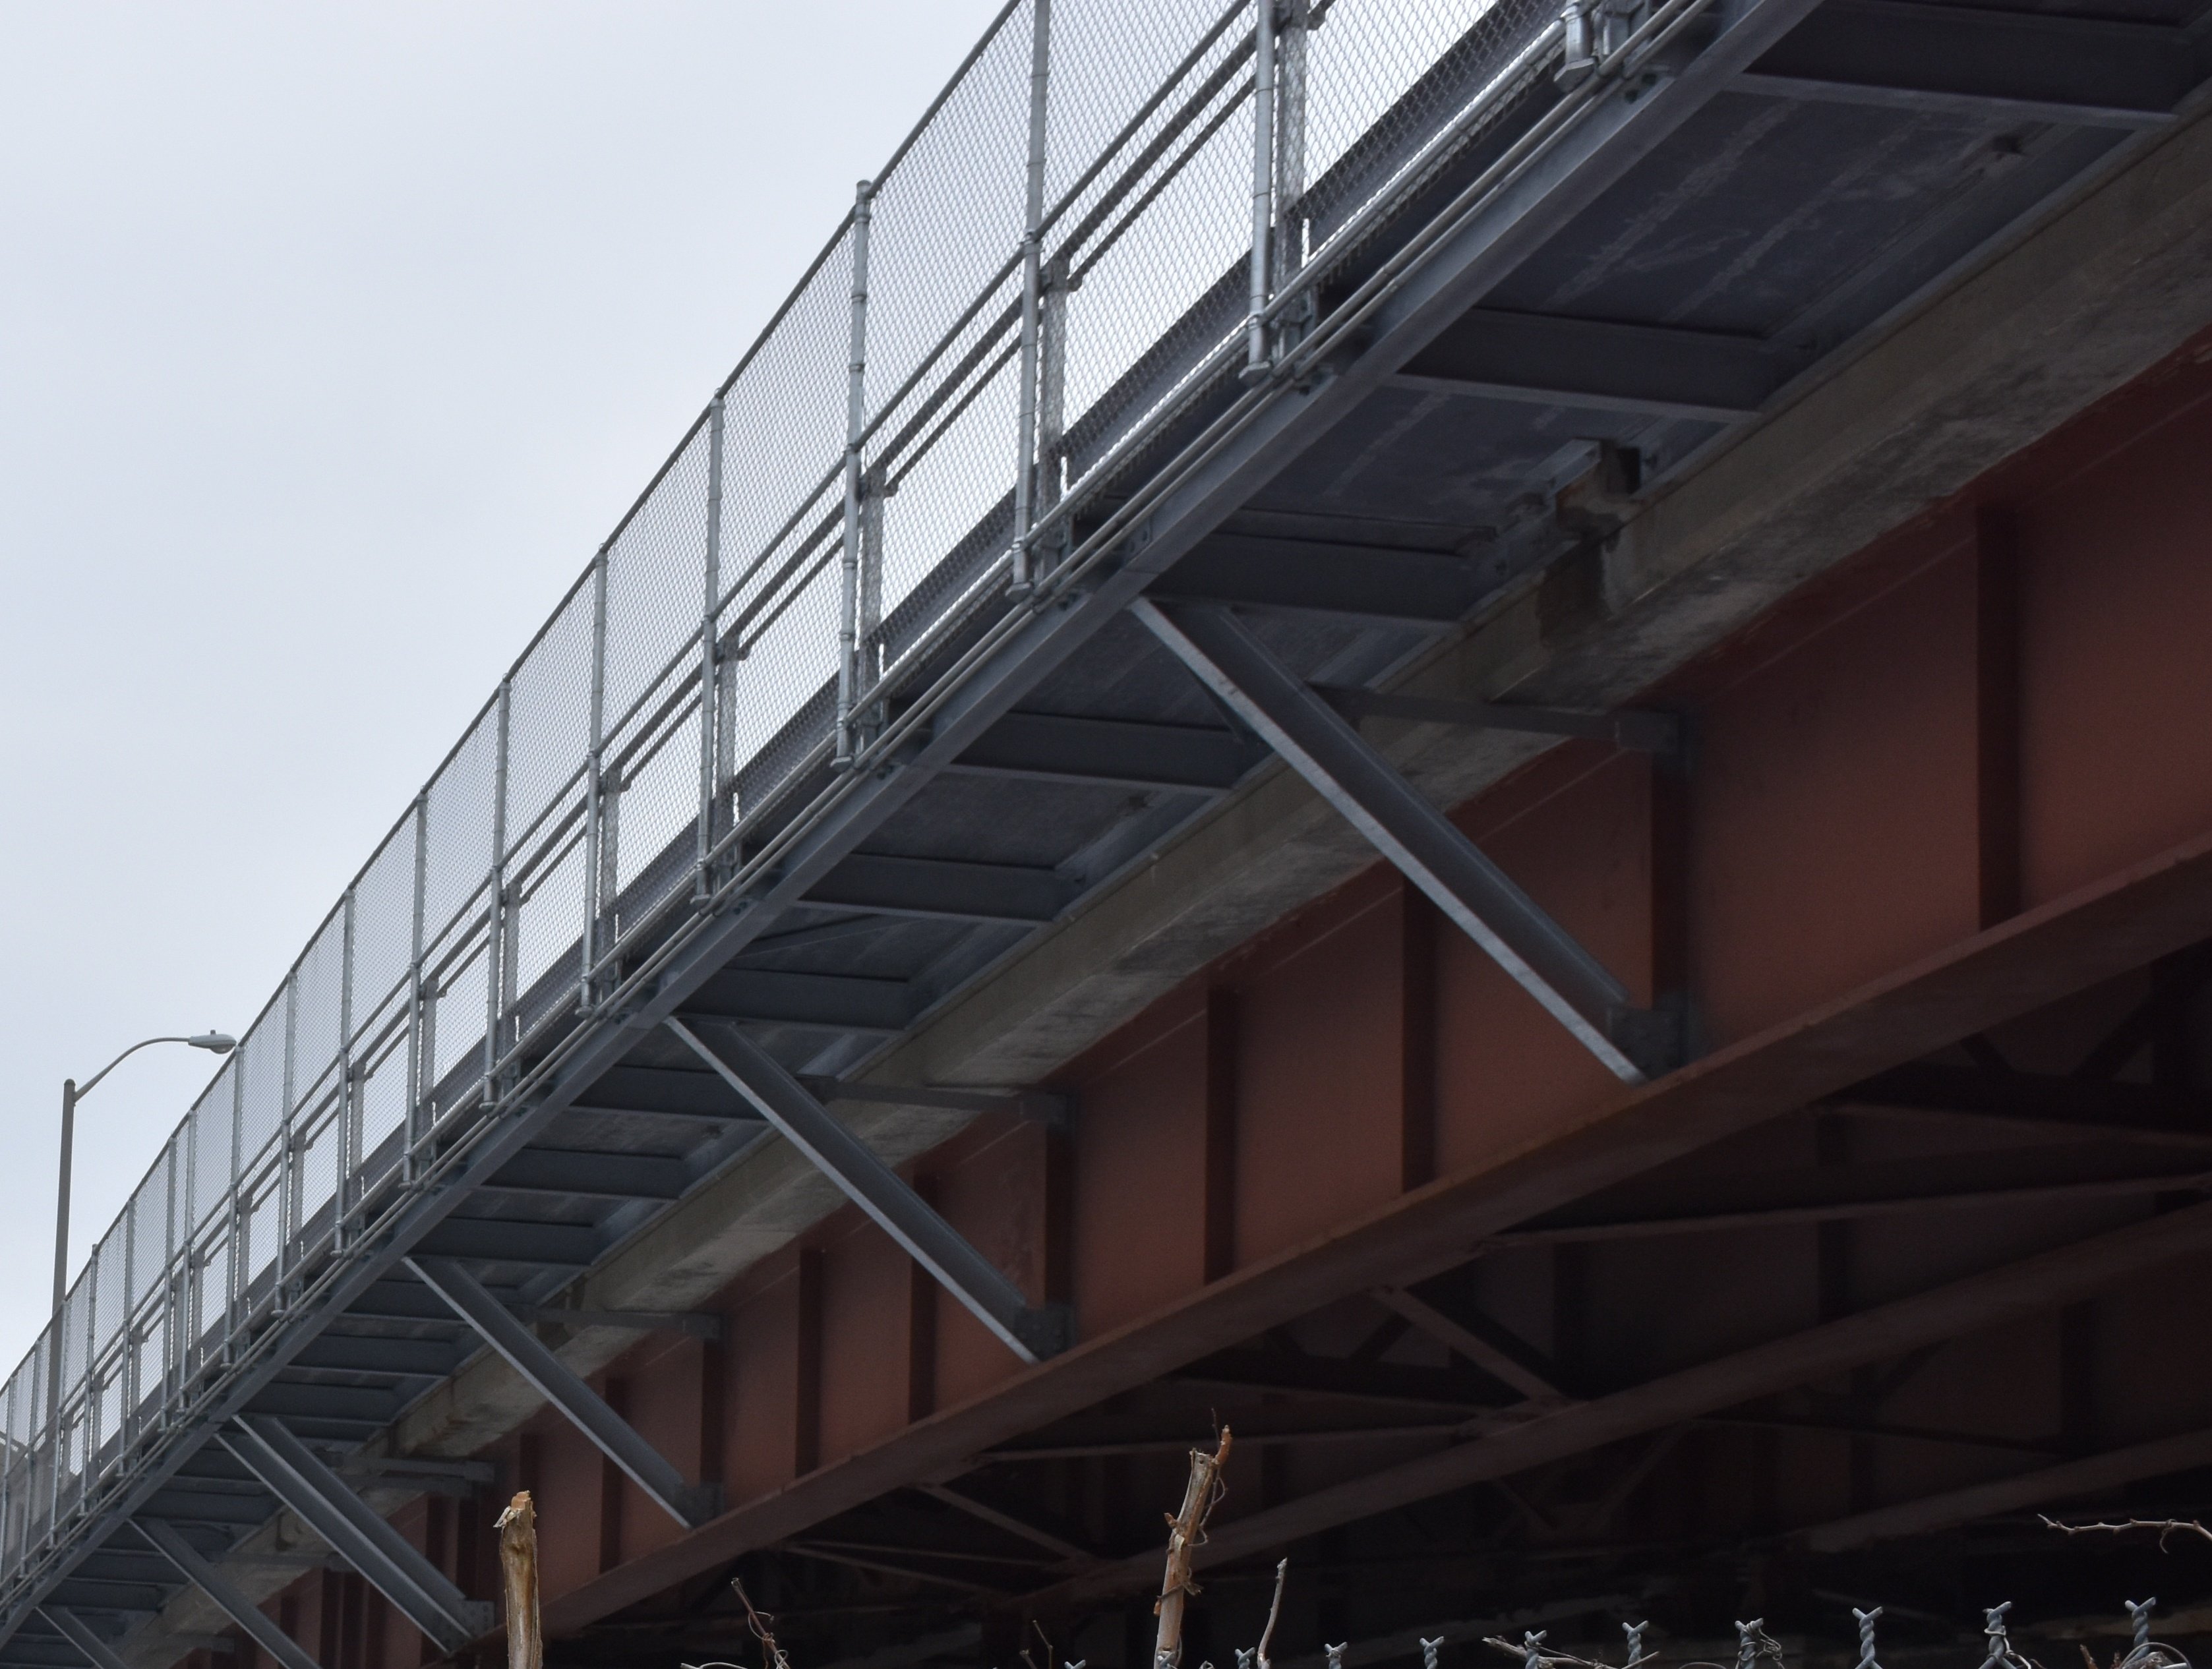 NY Replaces Aging Walkway with FiberSPAN-C Cantilever Sidewalk System